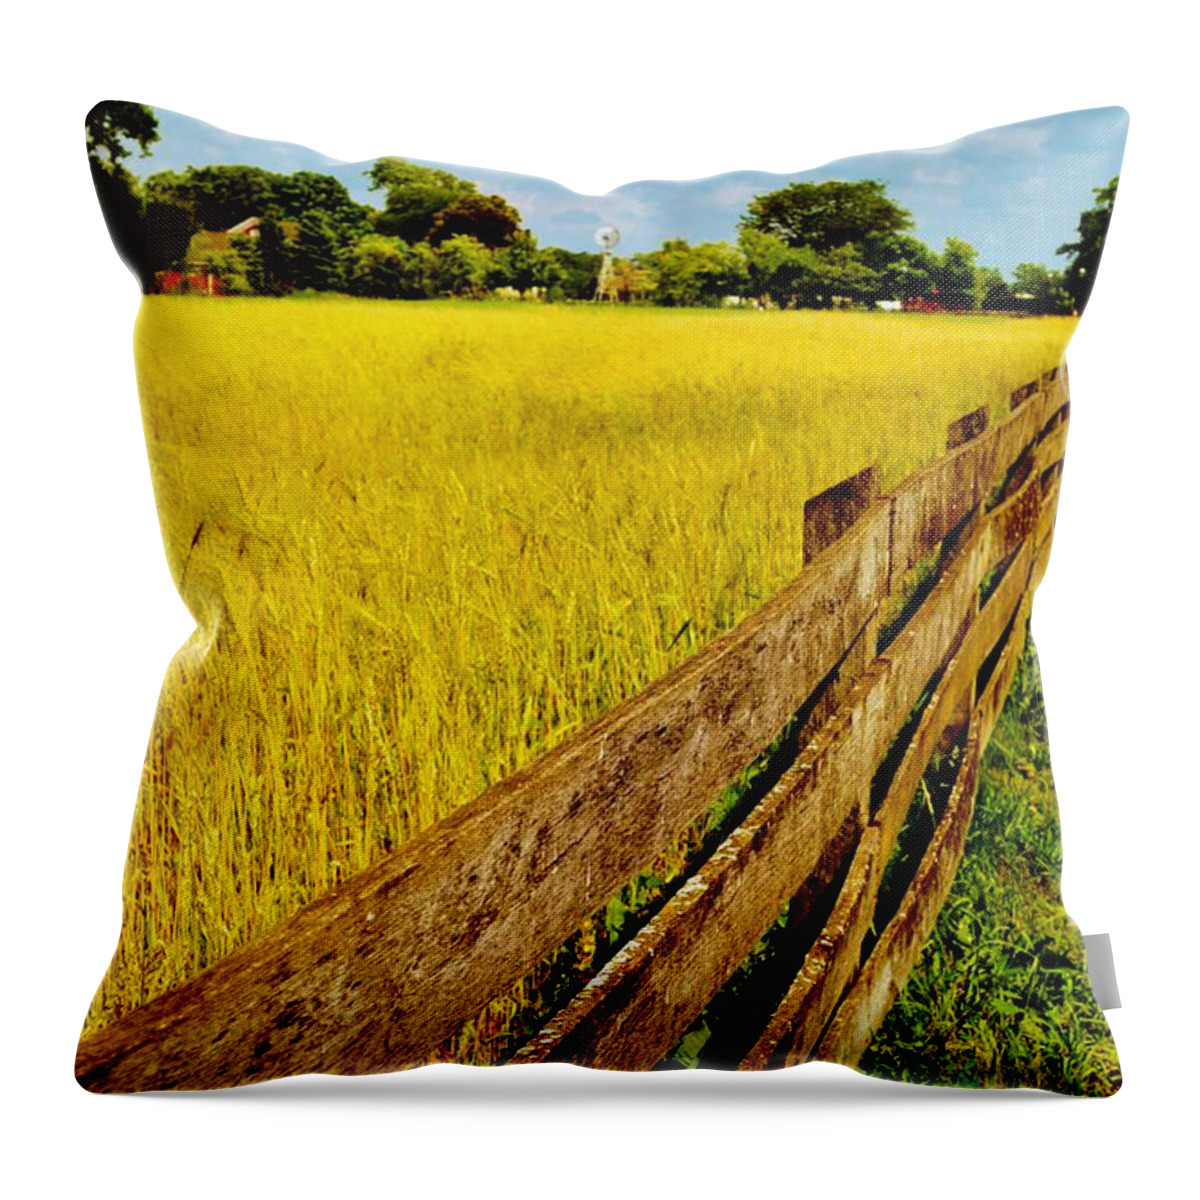  Throw Pillow featuring the photograph Growing History by Daniel Thompson